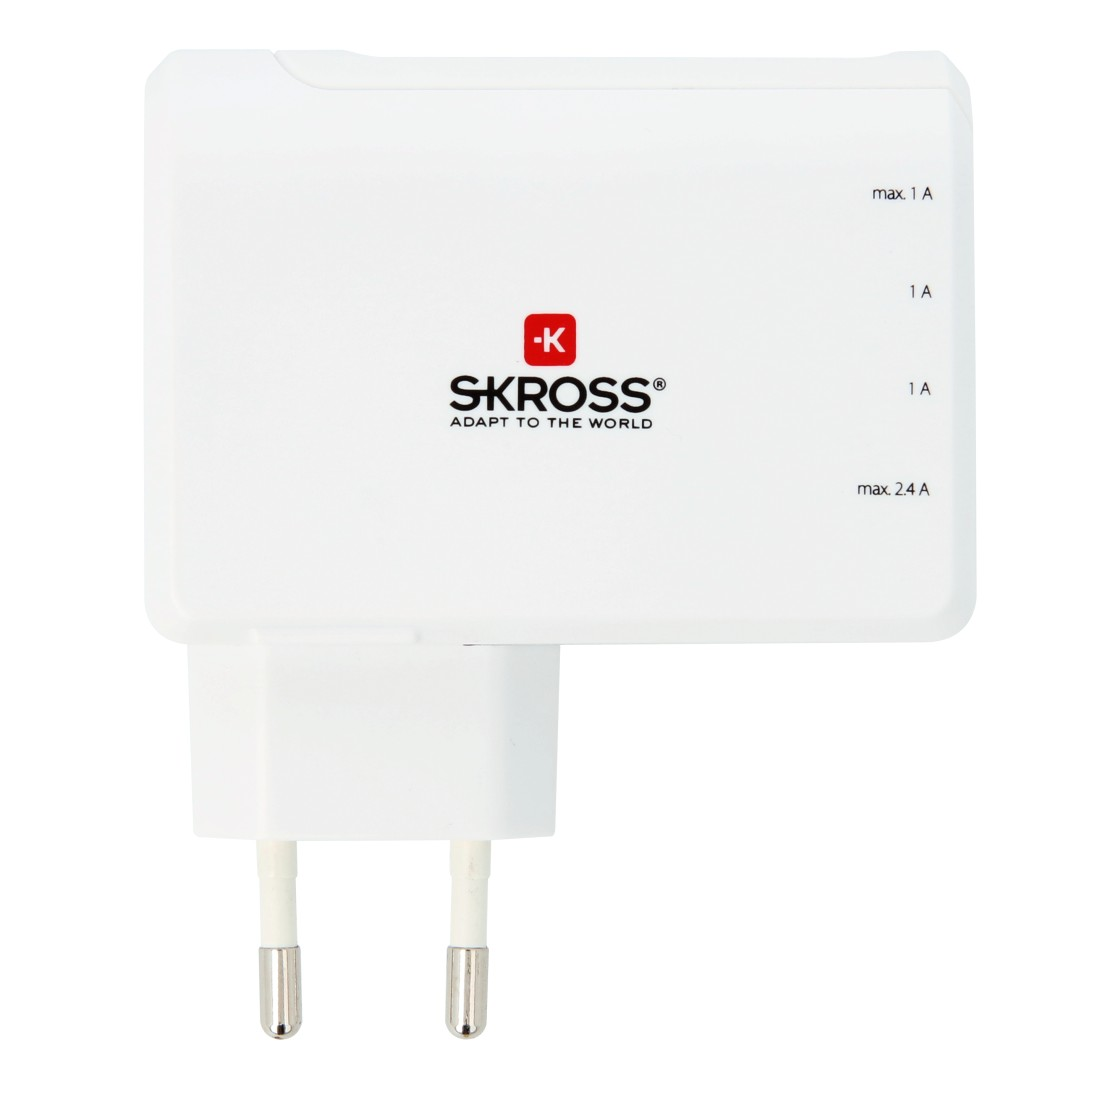 NA746 USB USB Euro Charger 4-Port Weiß Charger SKROSS